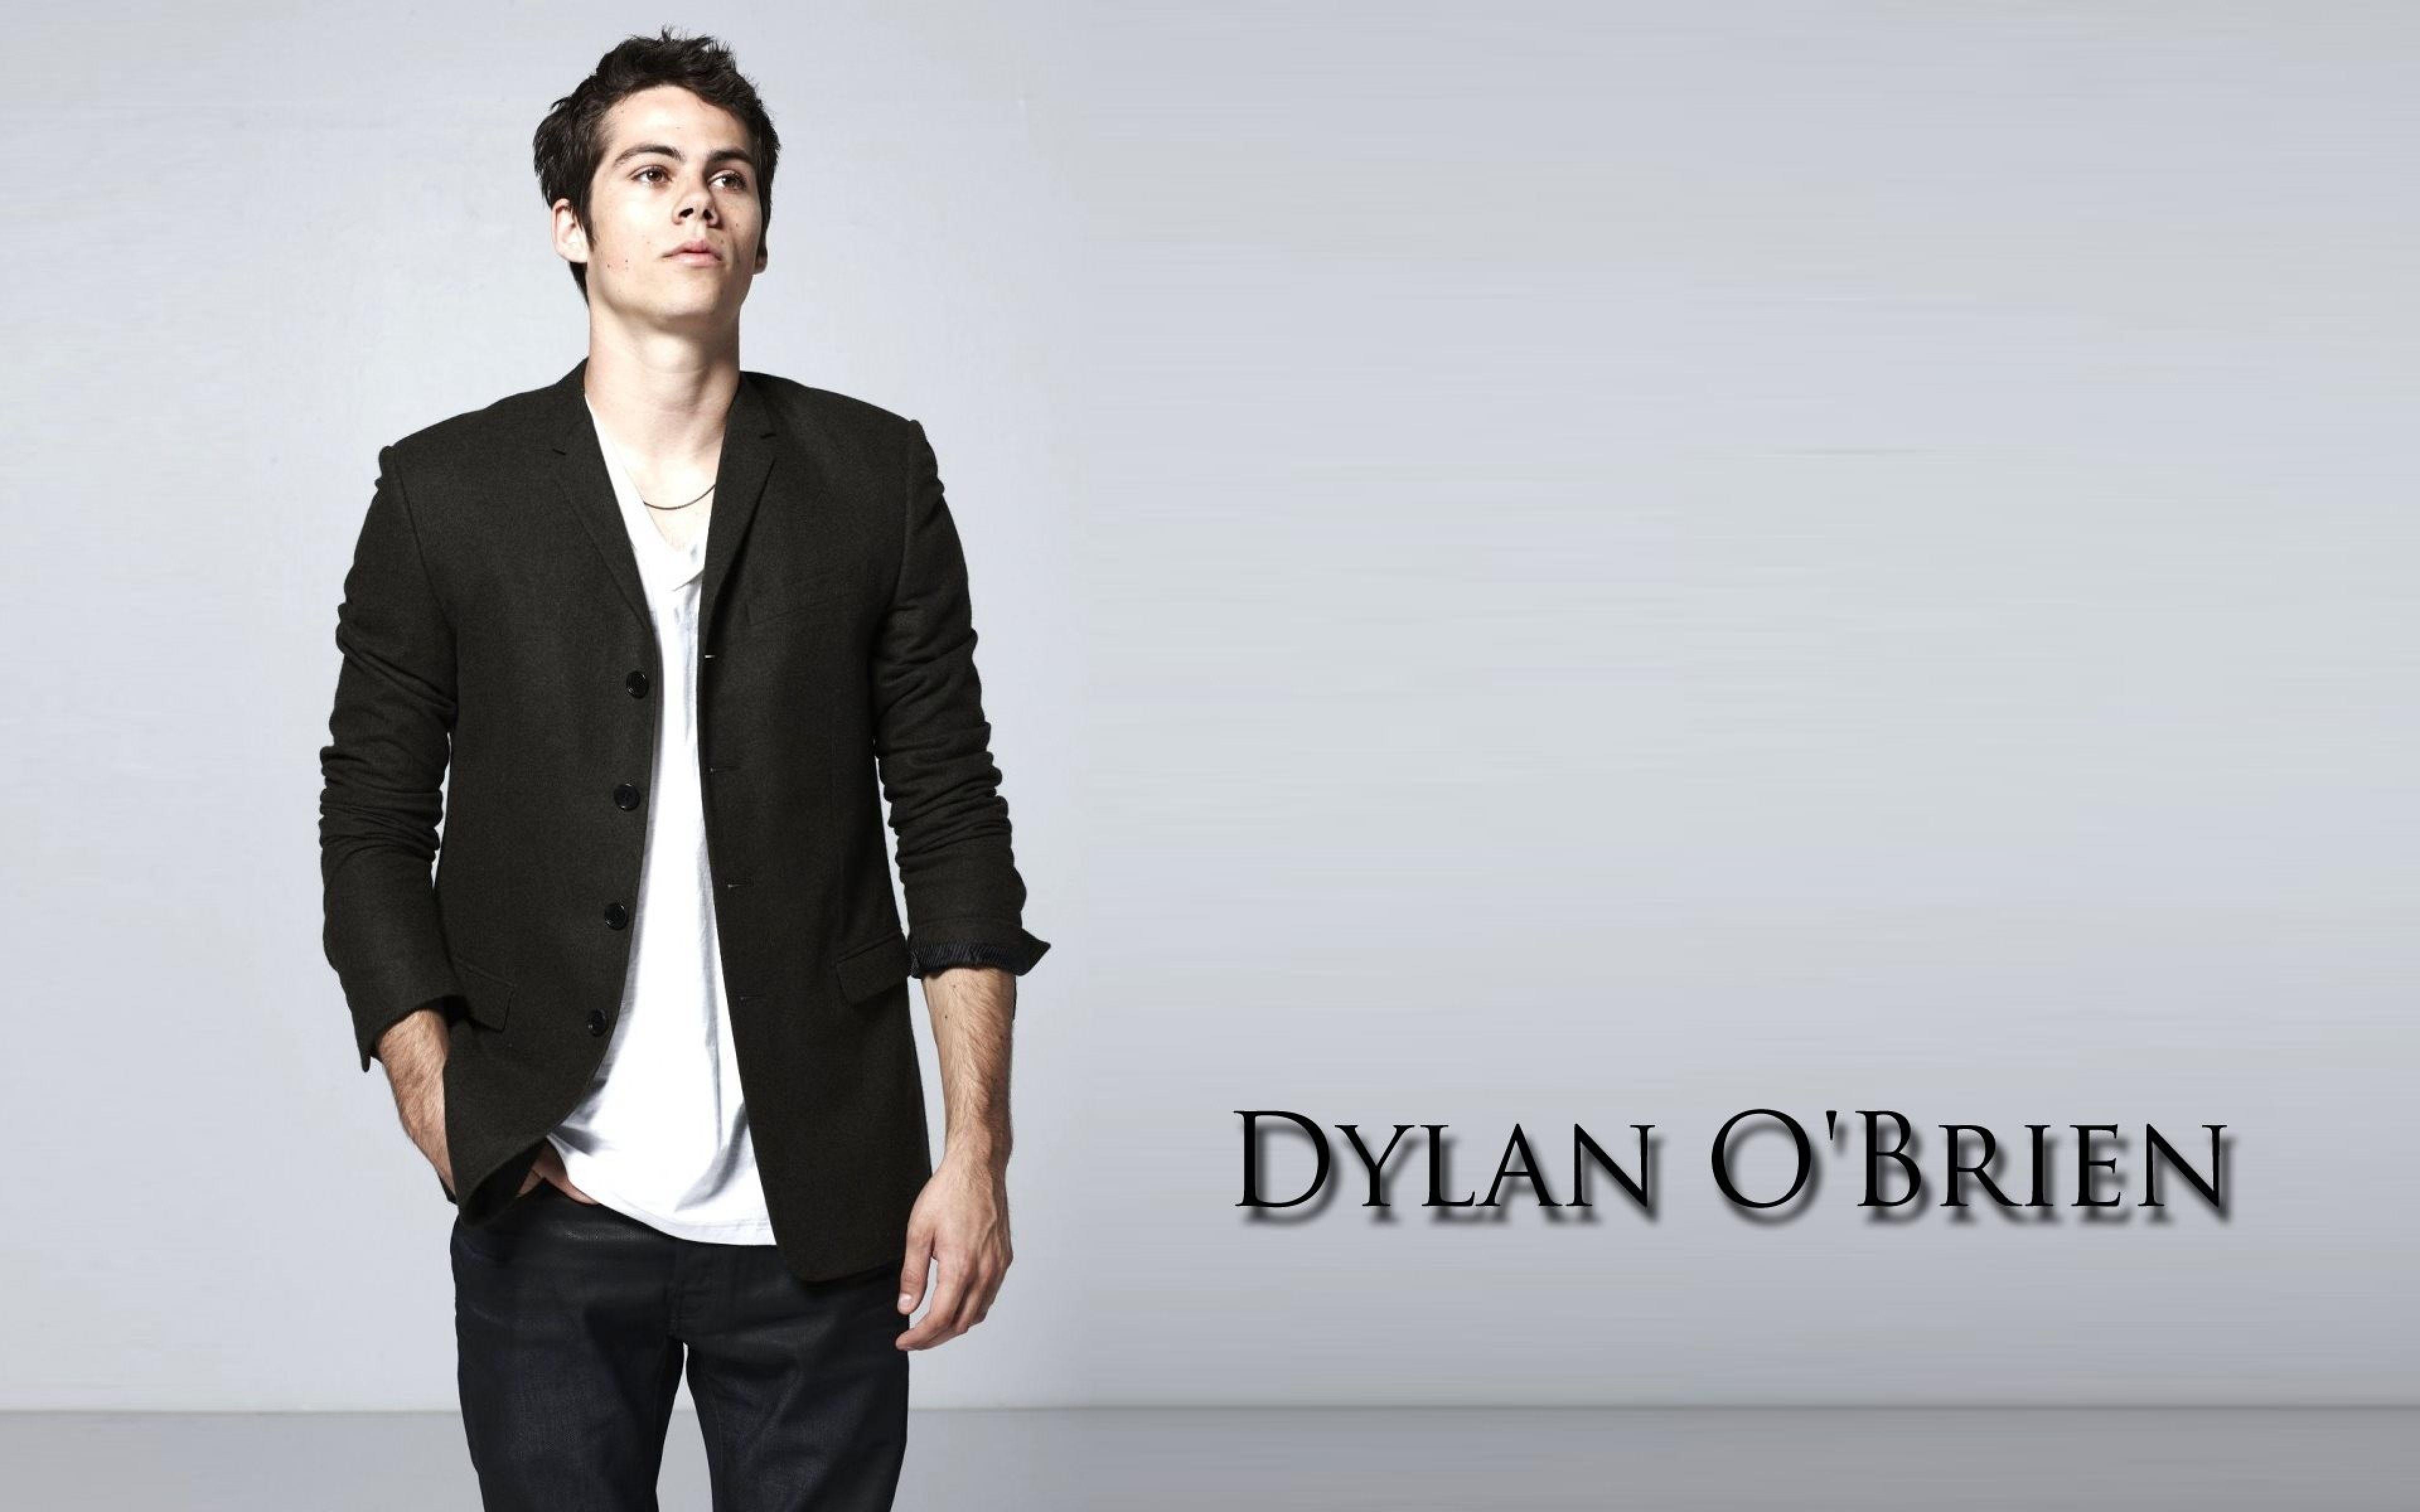 Dylan O'Brien Wallpaper, Dylan O'Brien Image for Windows and Mac